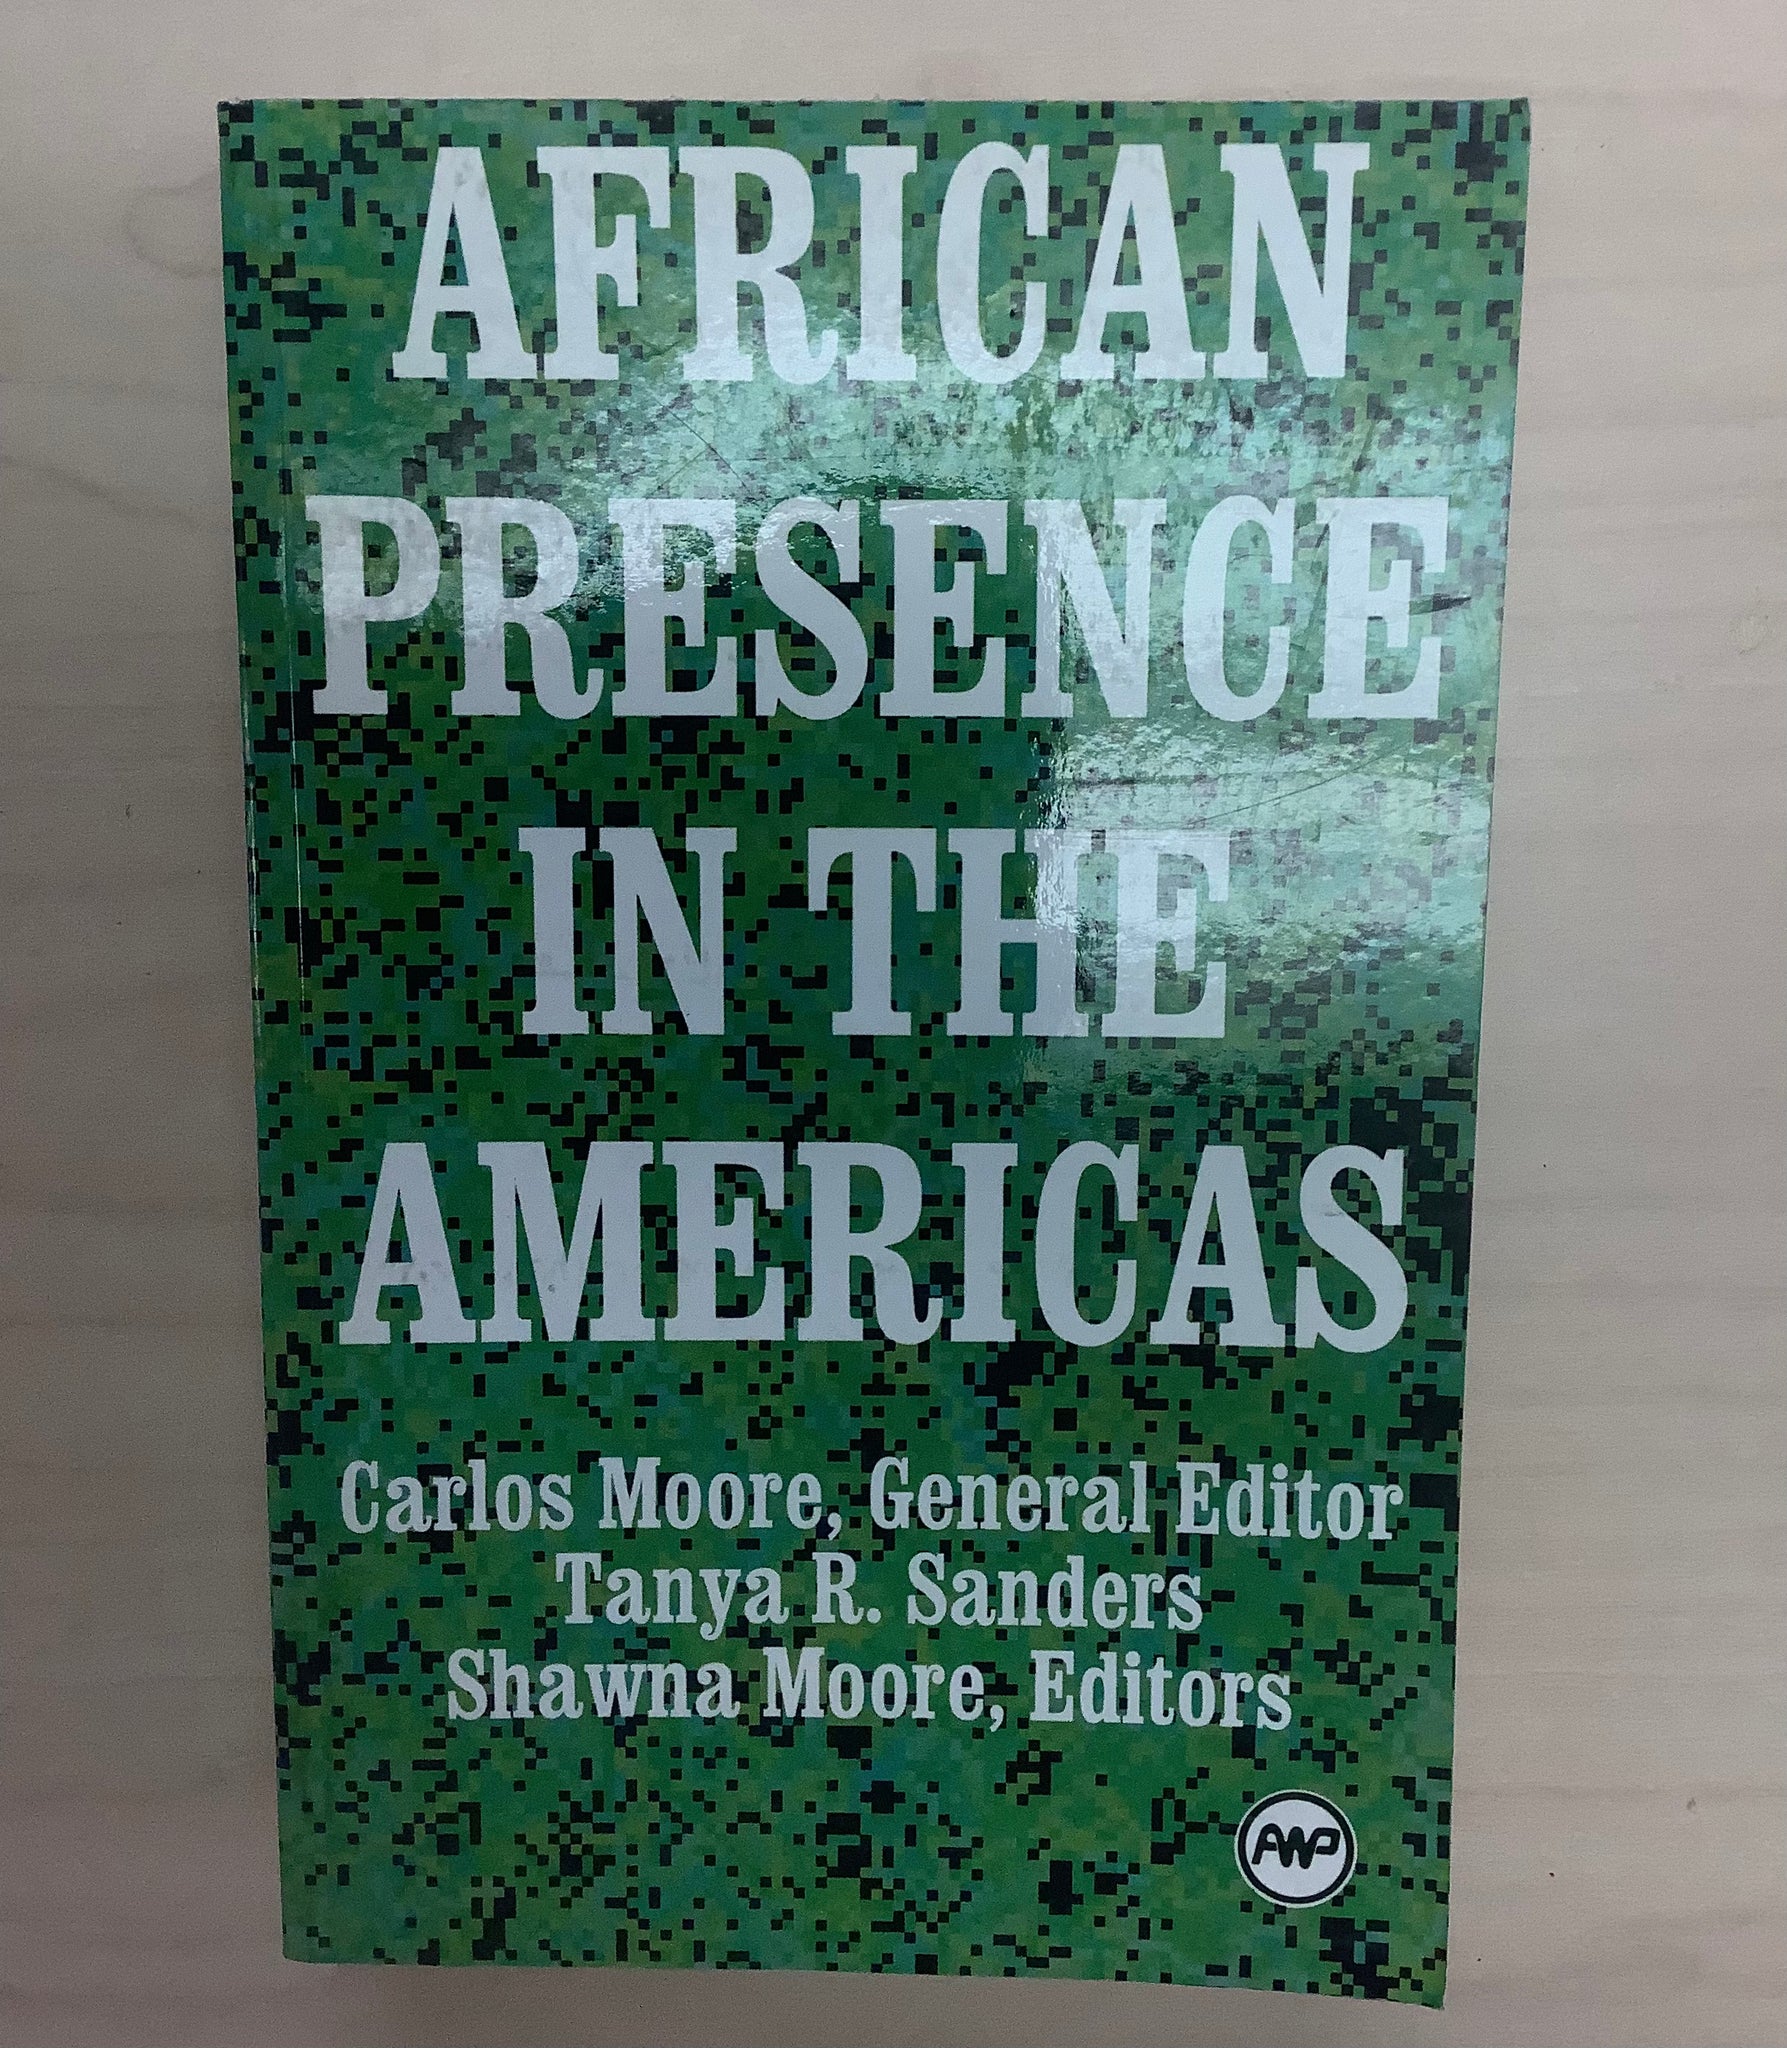 African Presence in the Americas(Paperback)